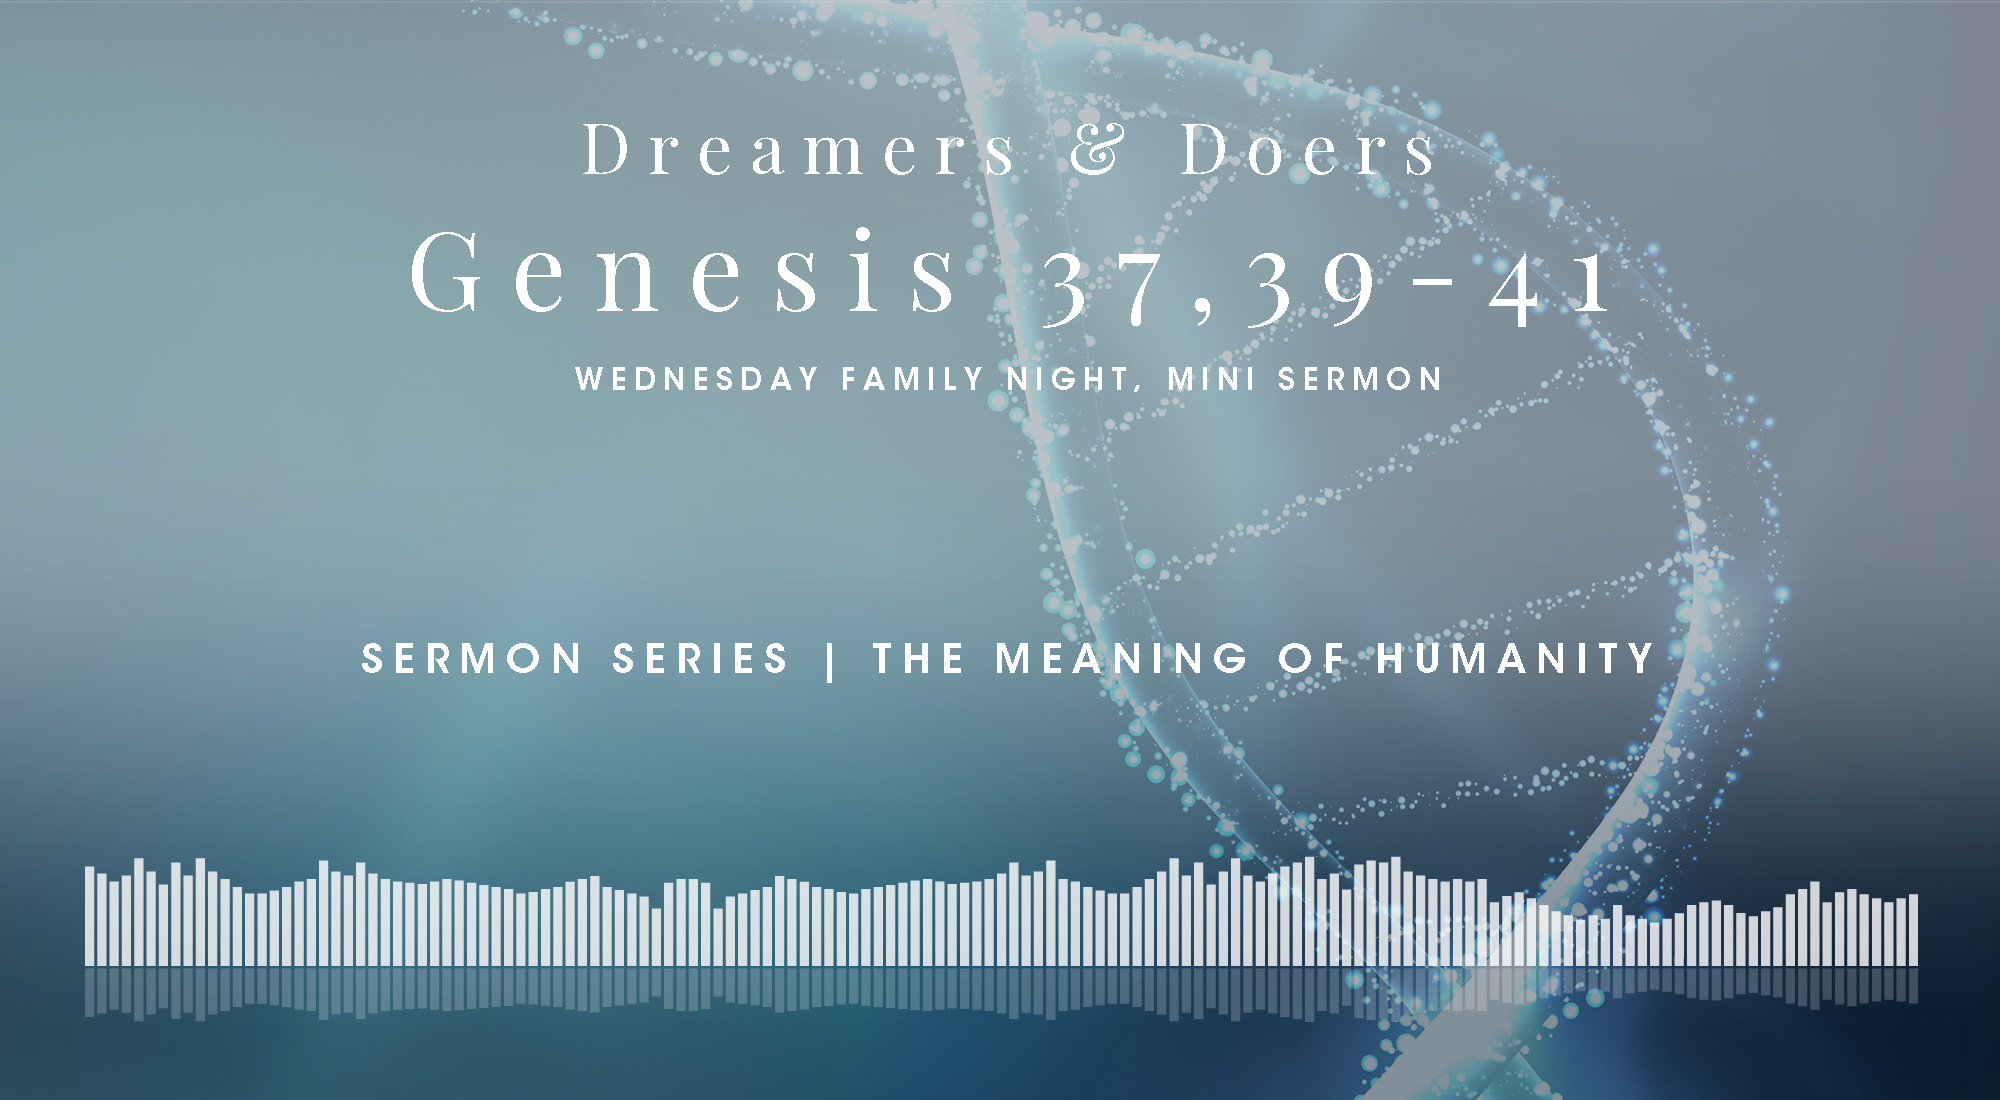 A Mini Bible Study in Genesis 37 & 39-41, From The Meaning of Humanity Sermon Series, Wyandotte County Christian Church Wednesday Family Night